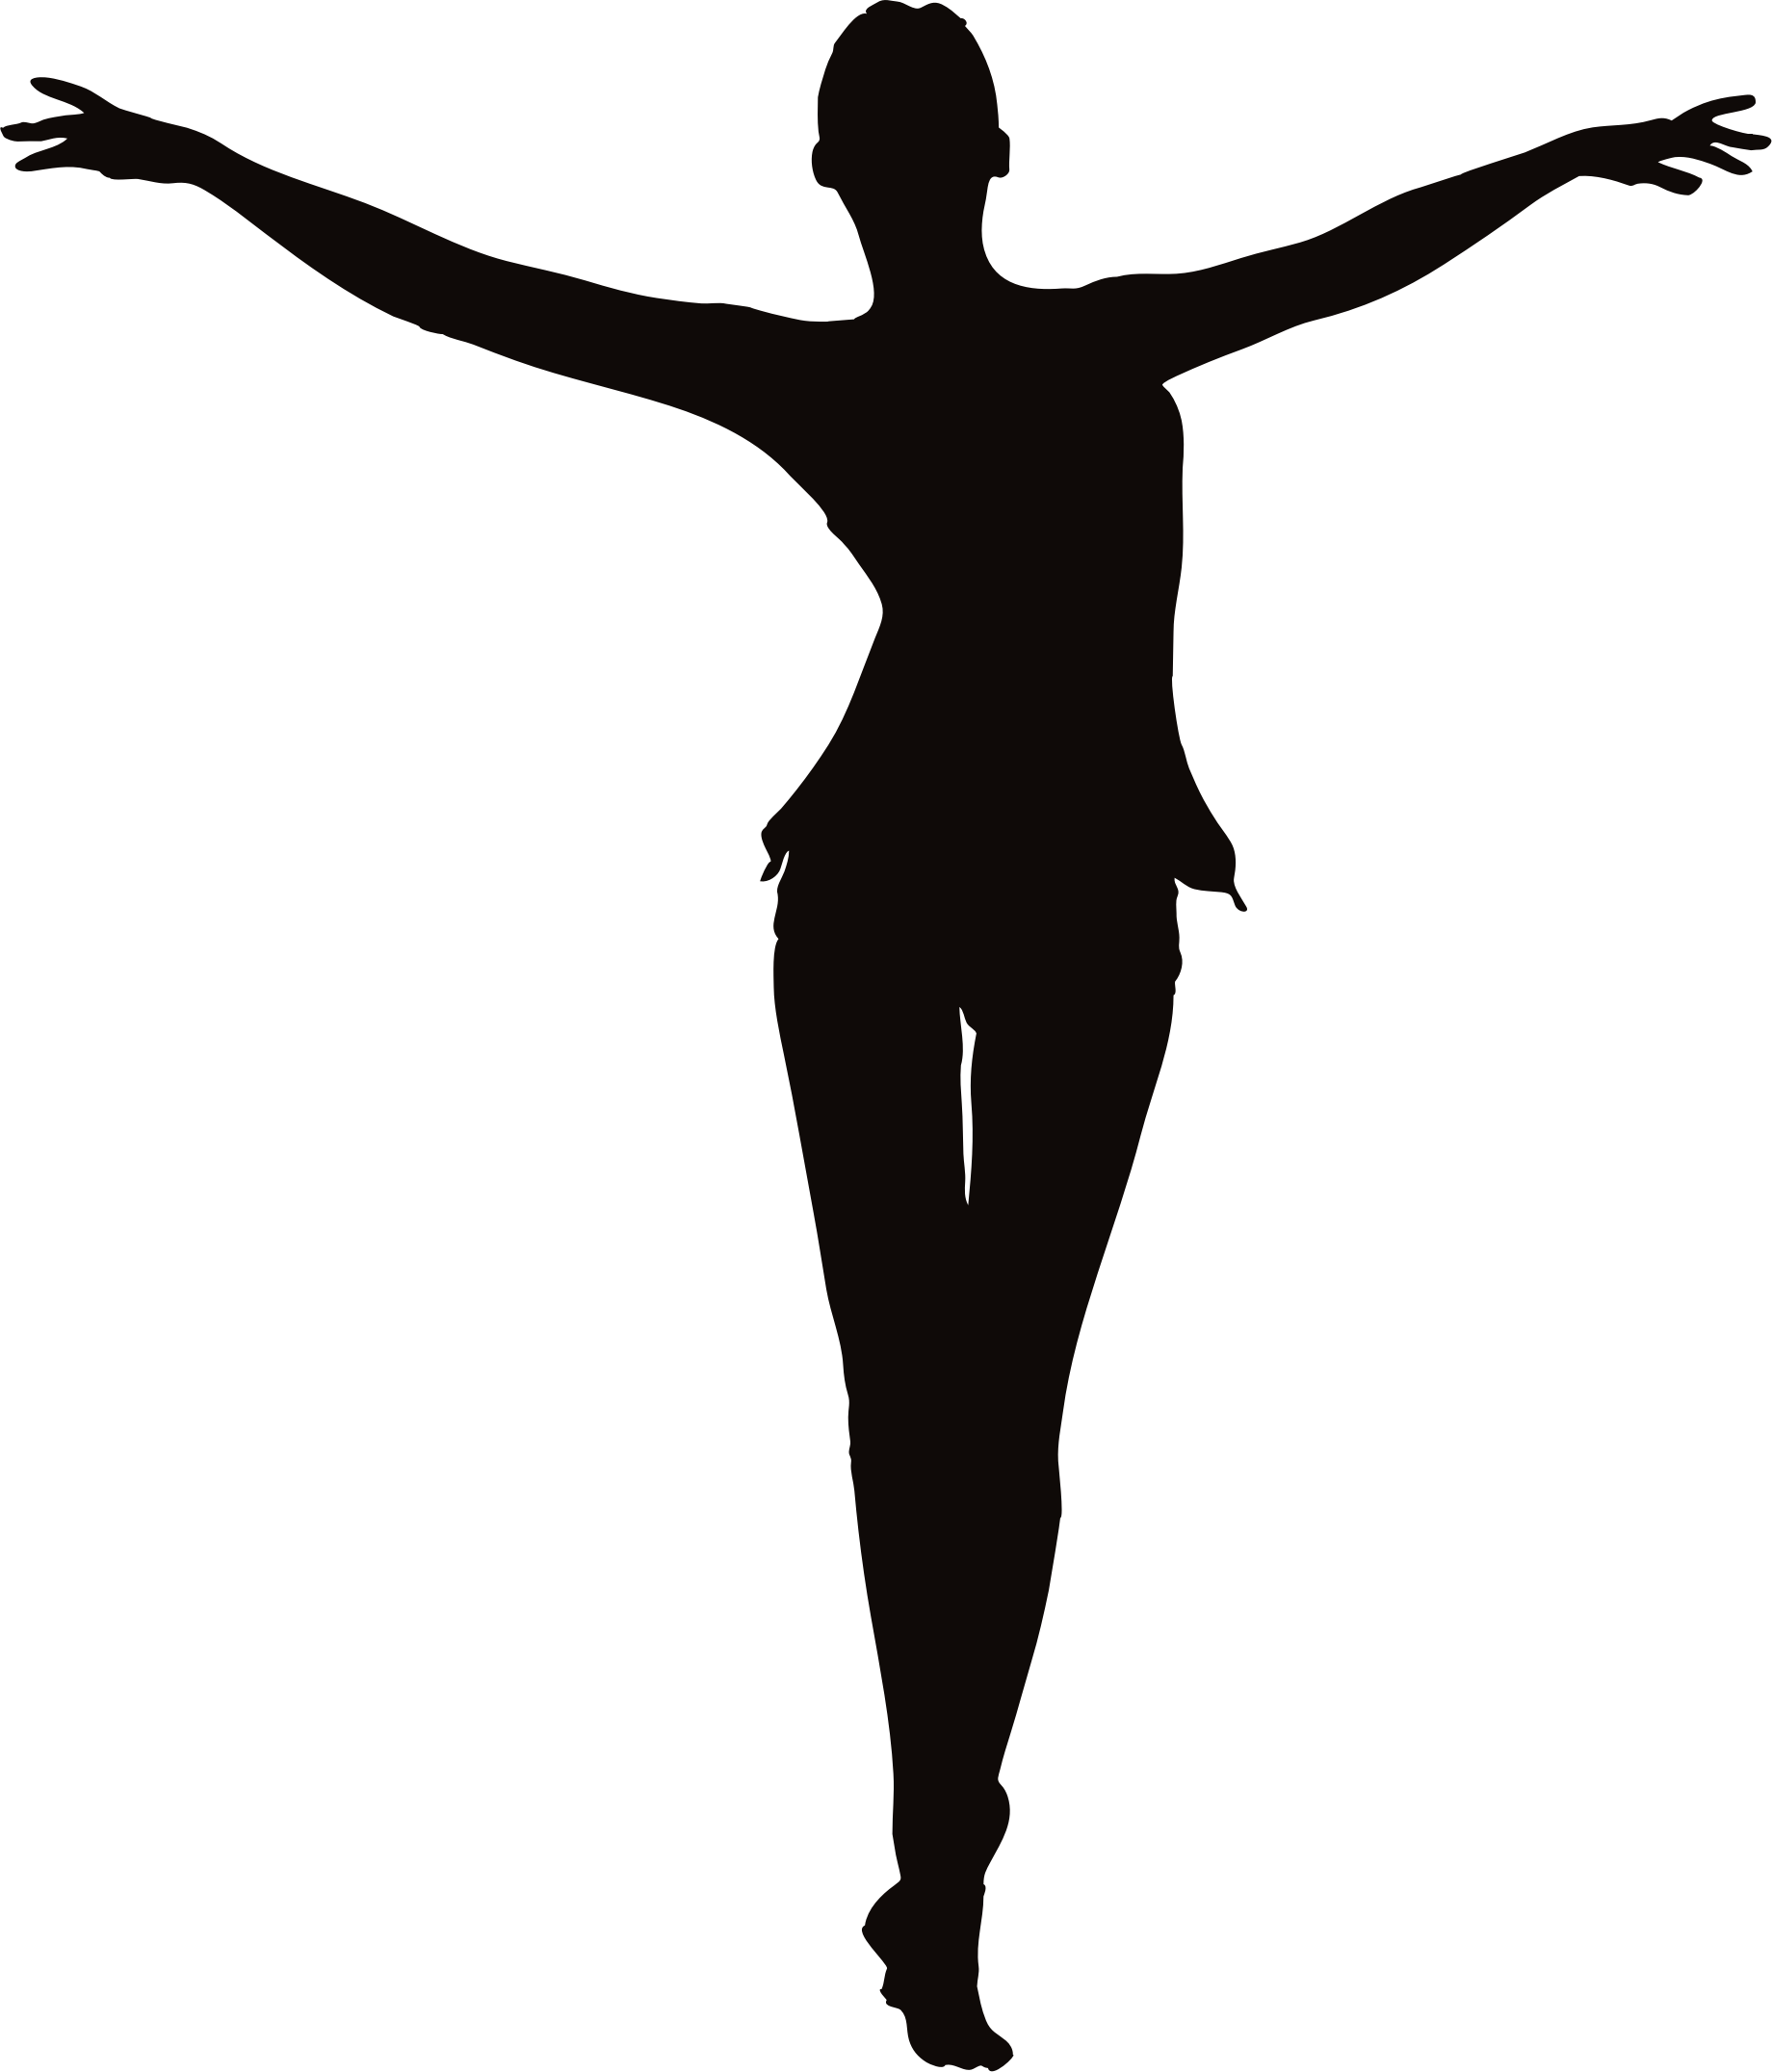 Female Figure Arms Up - Woman Arms Up Silhouette (1840x2152)